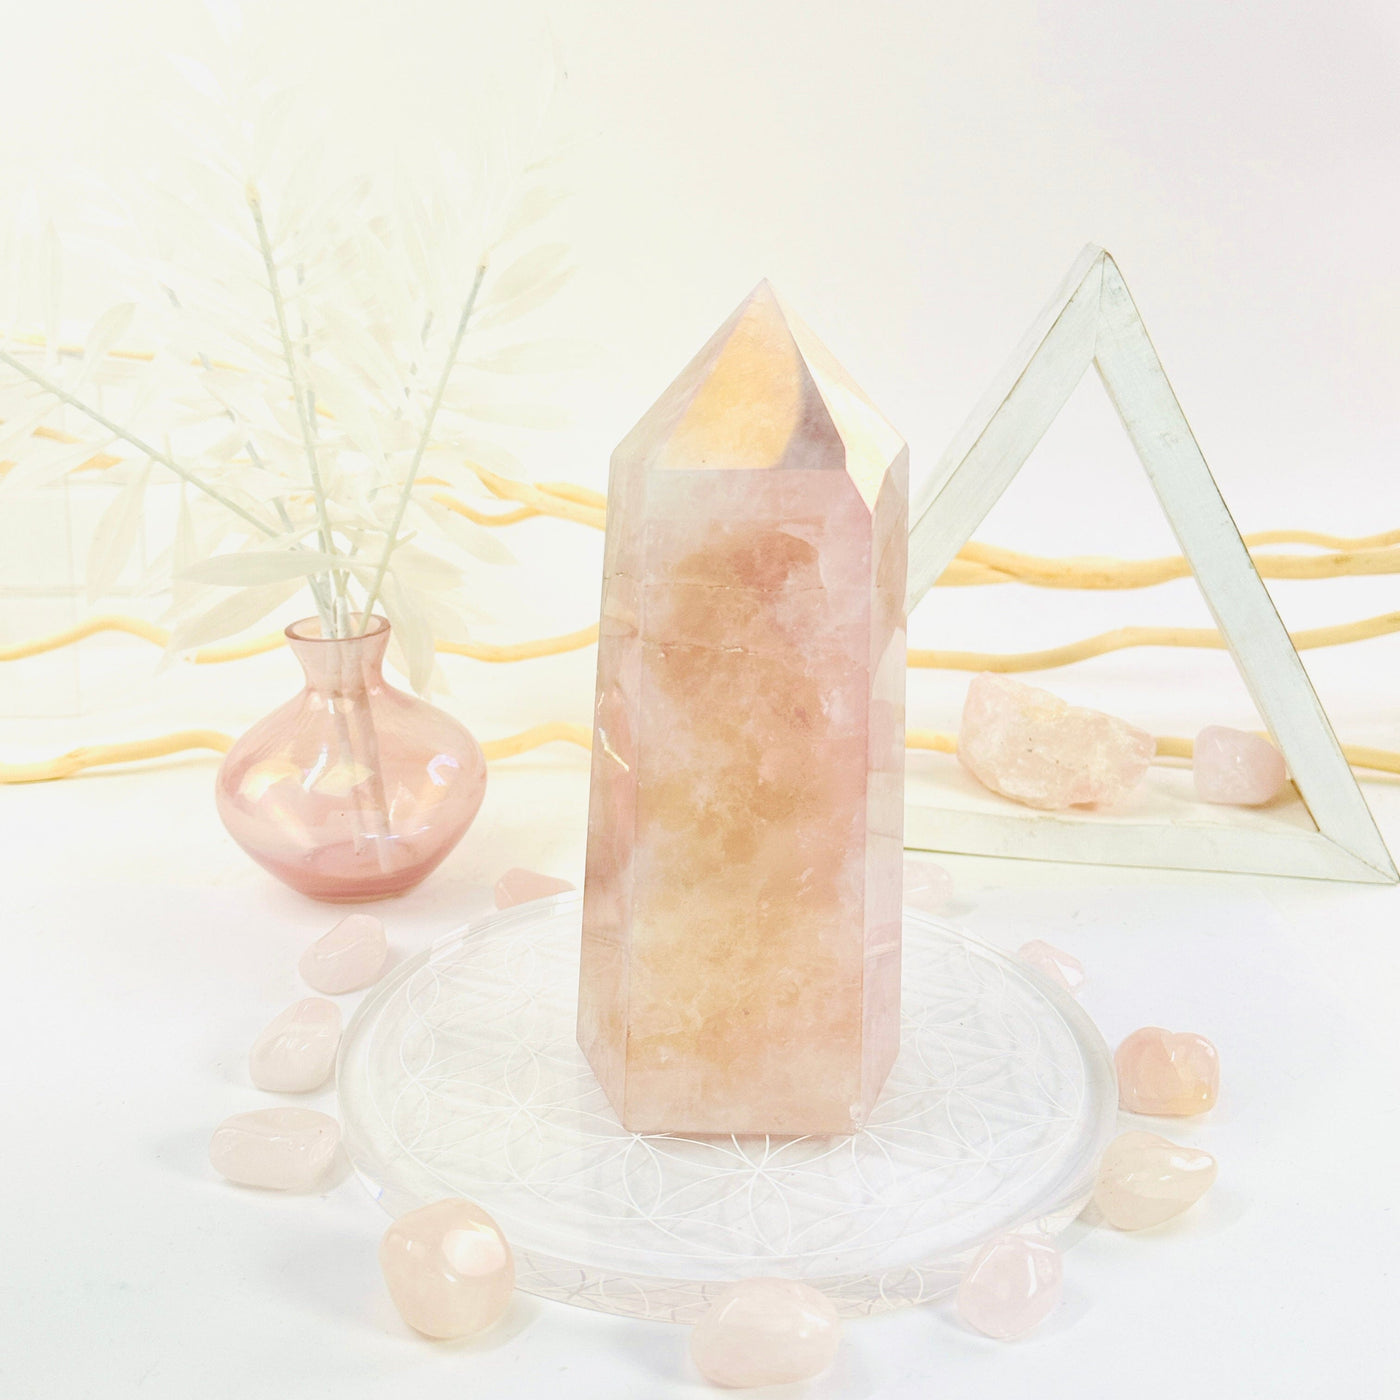 Angel Aura Rose Quartz Polished Point with Natural Inclusions back view